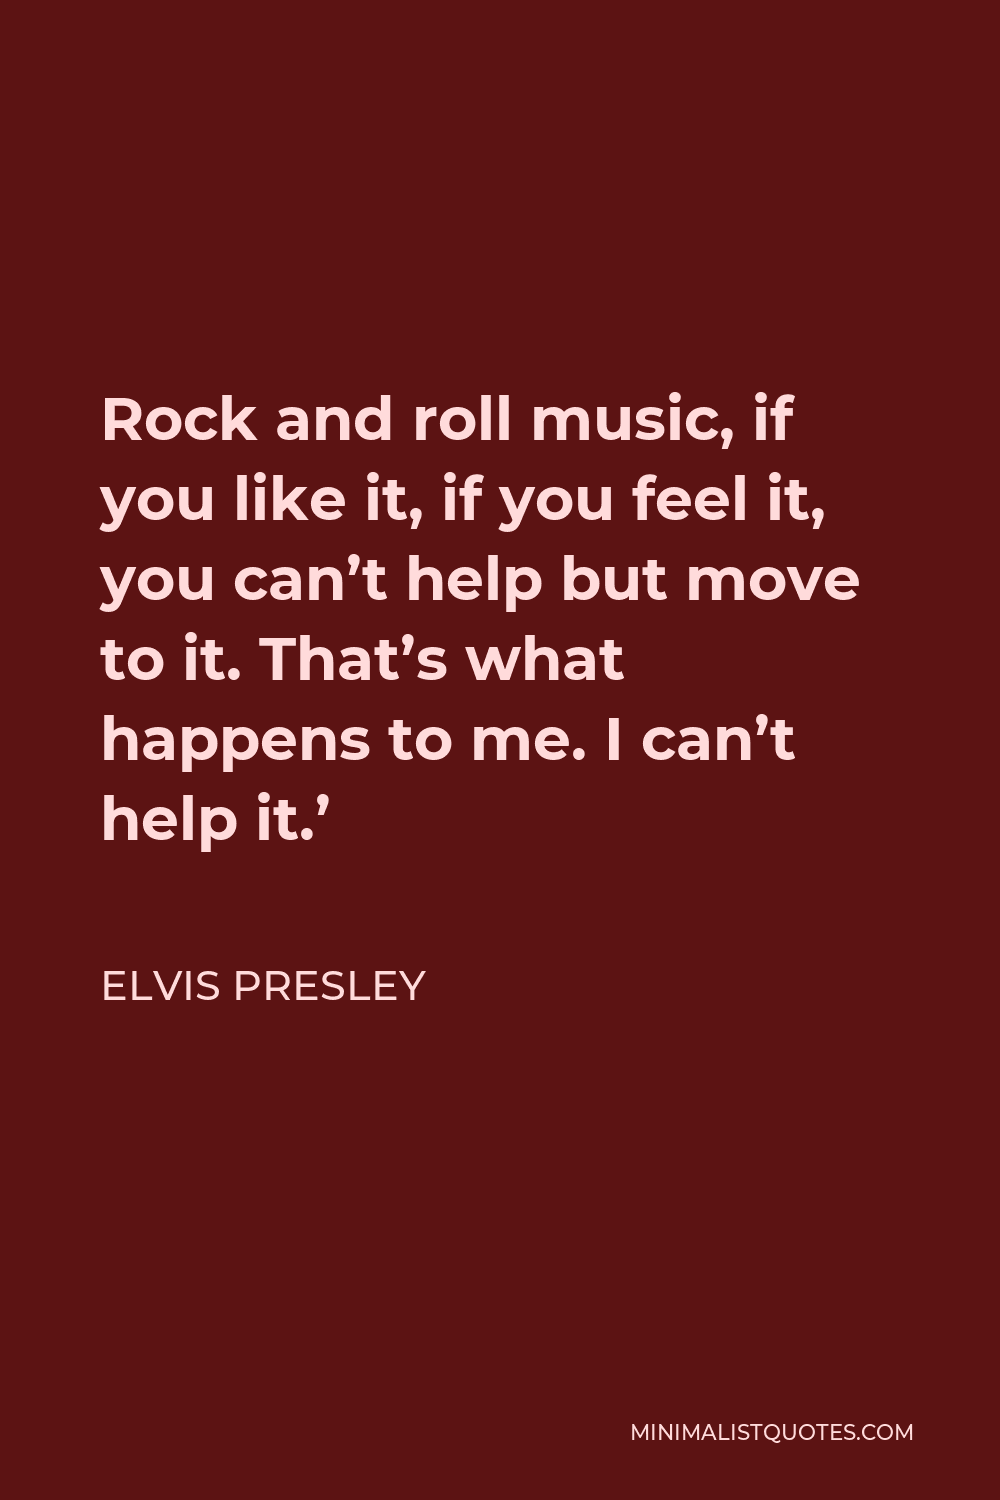 Elvis Presley Quote - Rock and roll music, if you like it, if you feel it, you can’t help but move to it. That’s what happens to me. I can’t help it.’